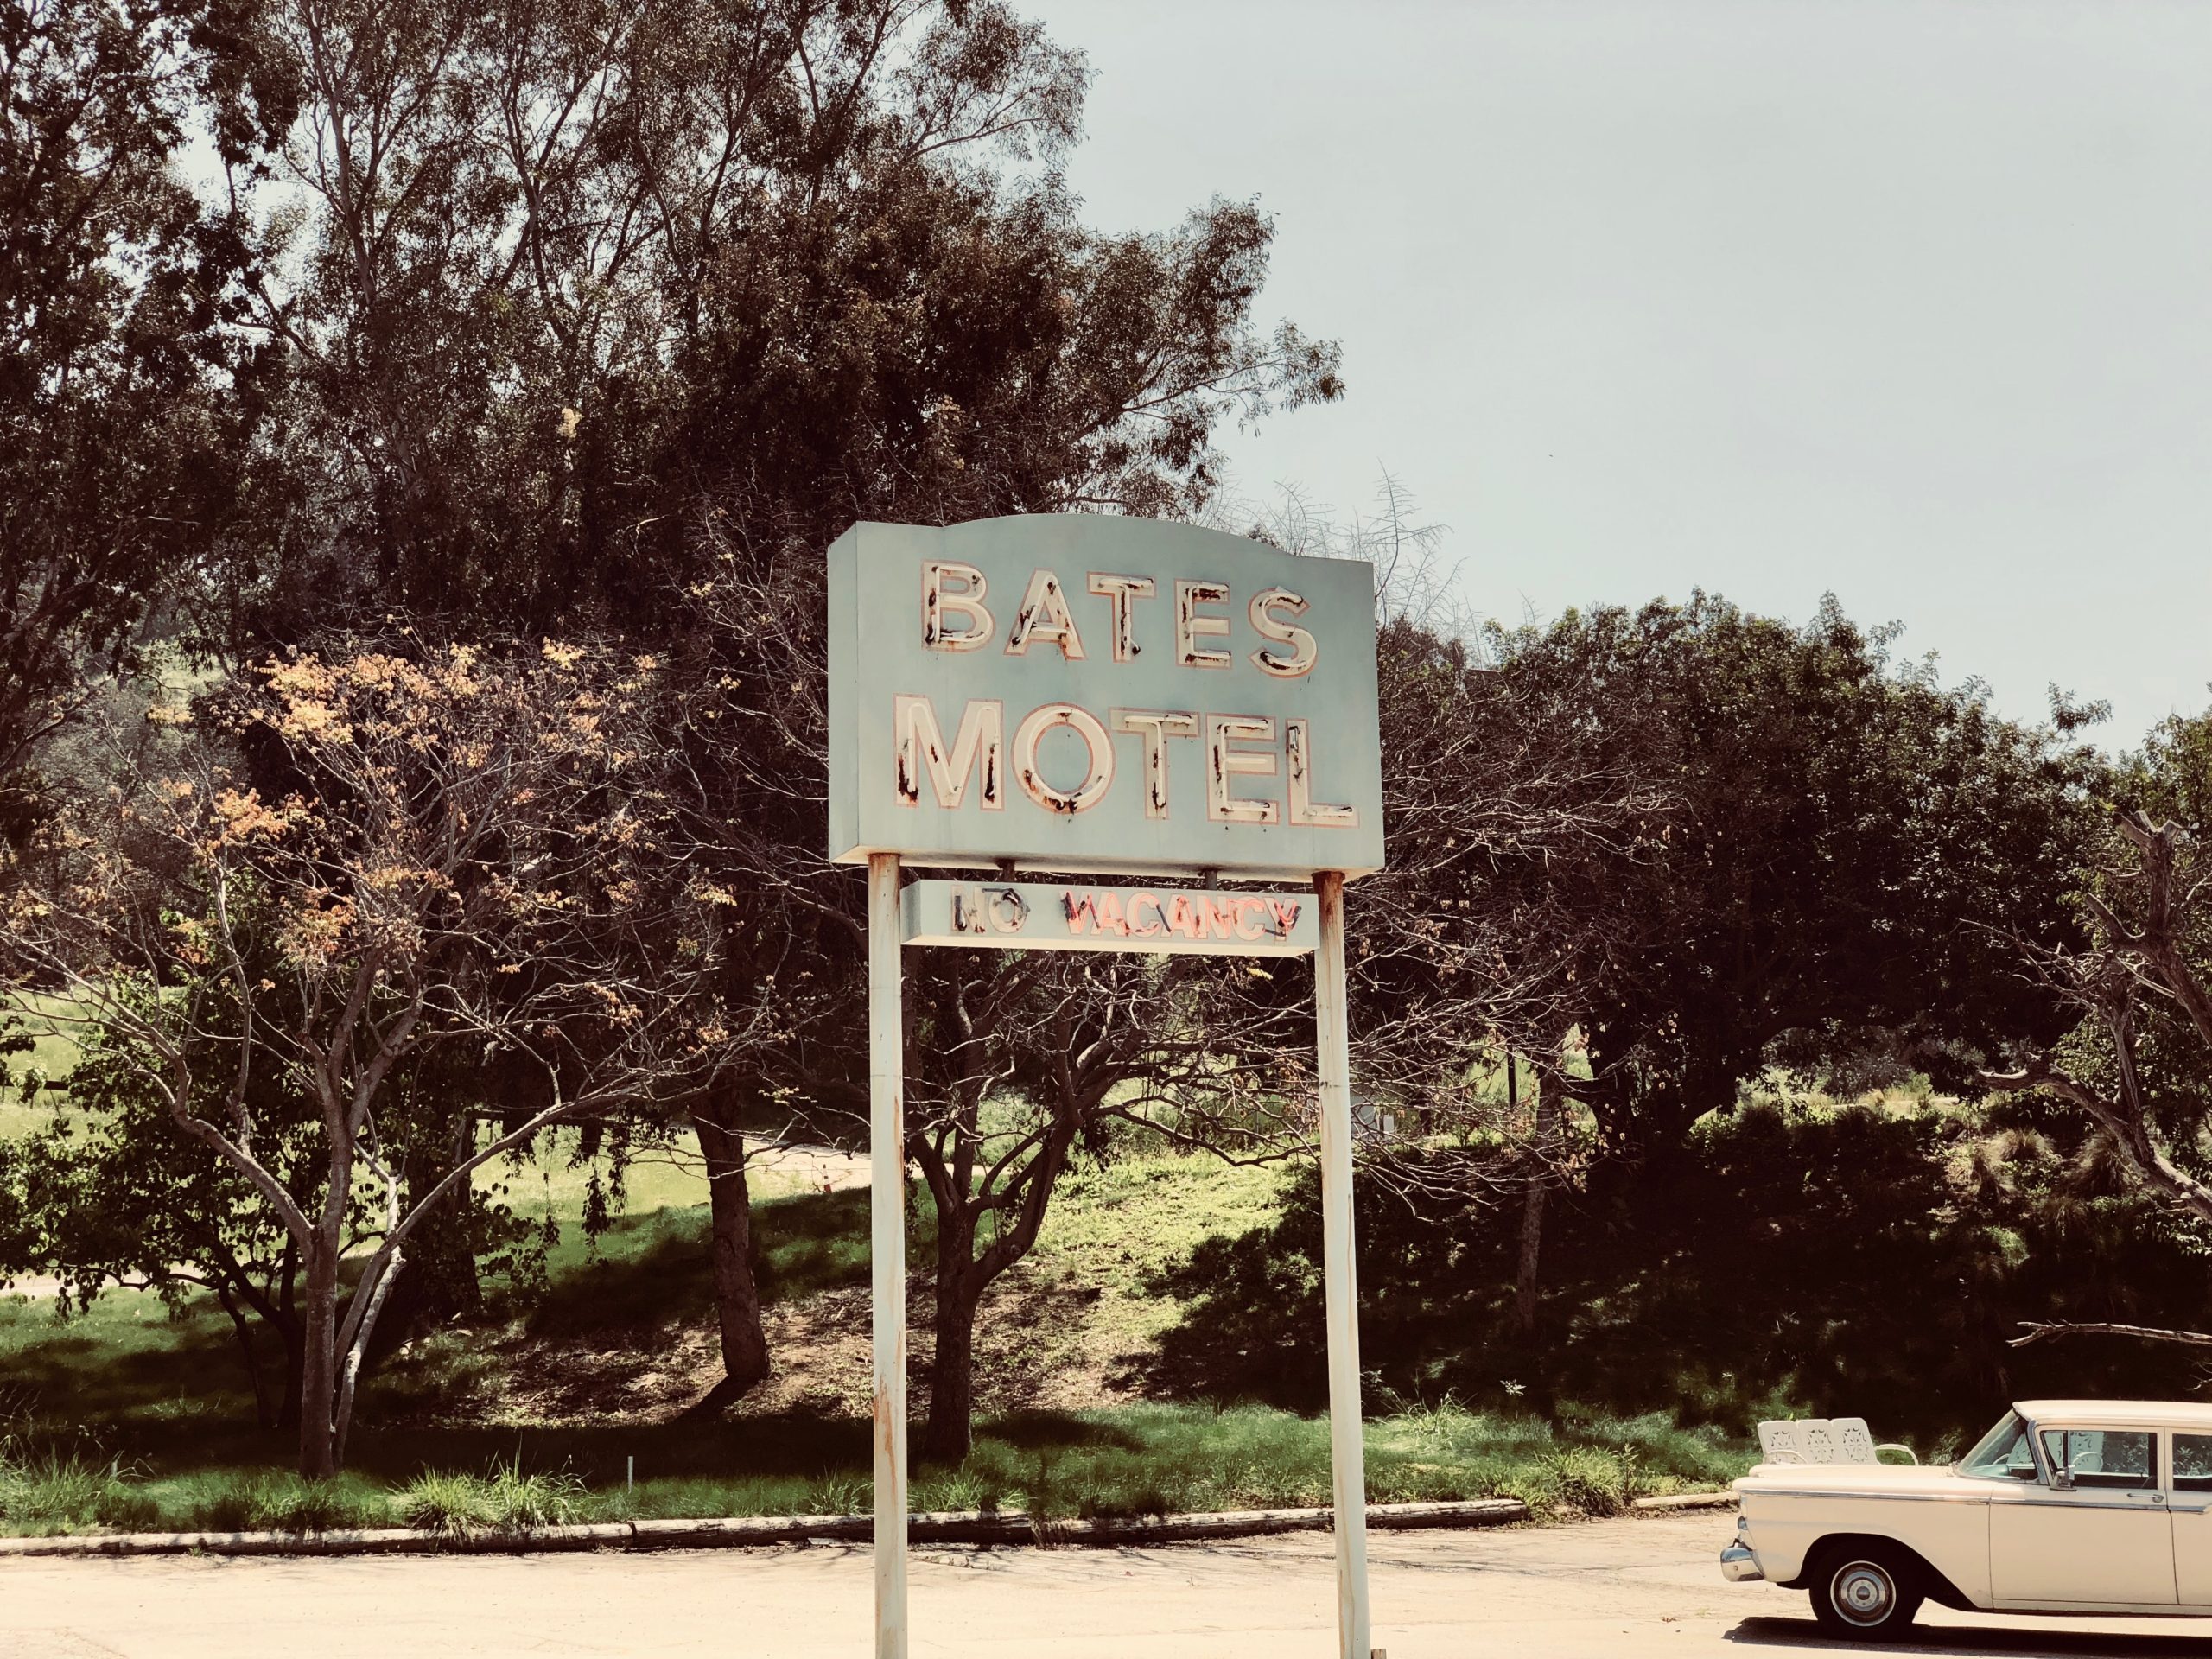 Bates Motel signage from Psycho by Alfred Hitchcock, one of the most famous horror directors